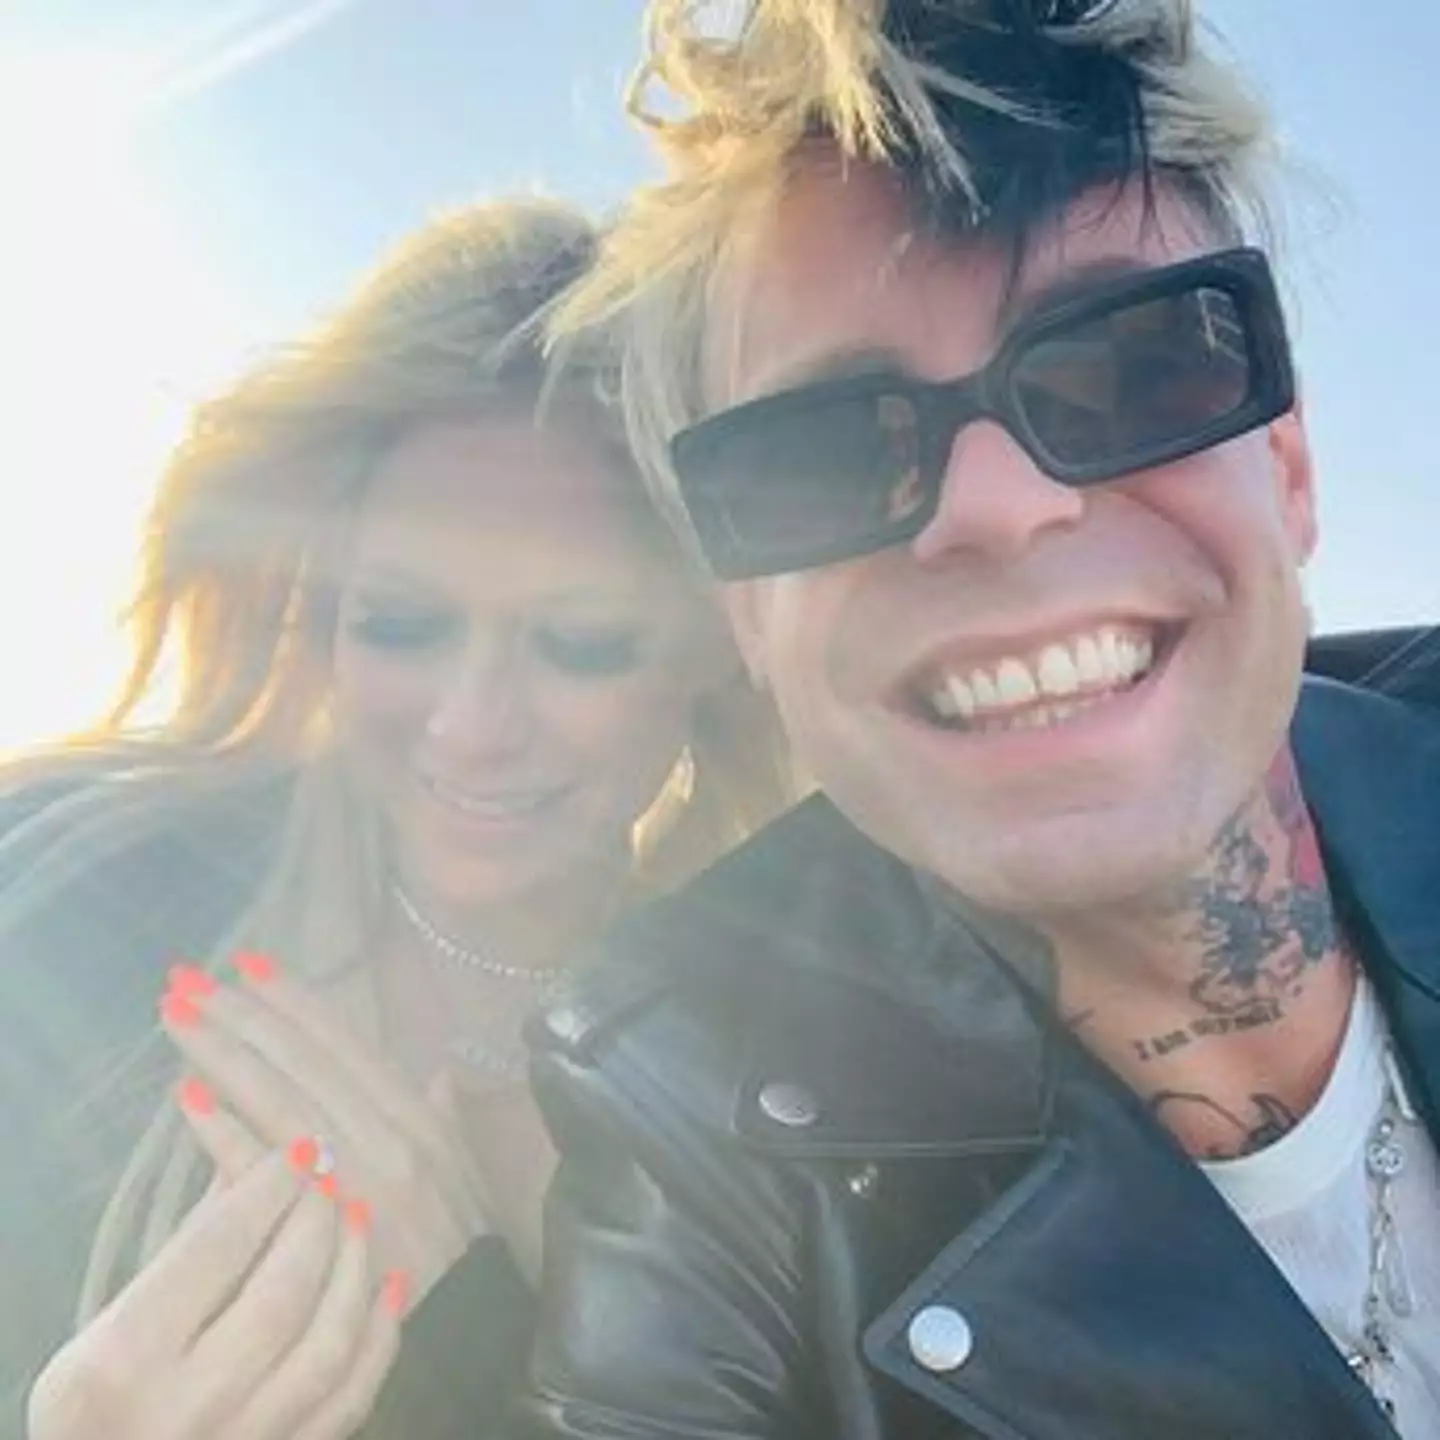 Avril was previously engaged to rock singer, Mod Sun.